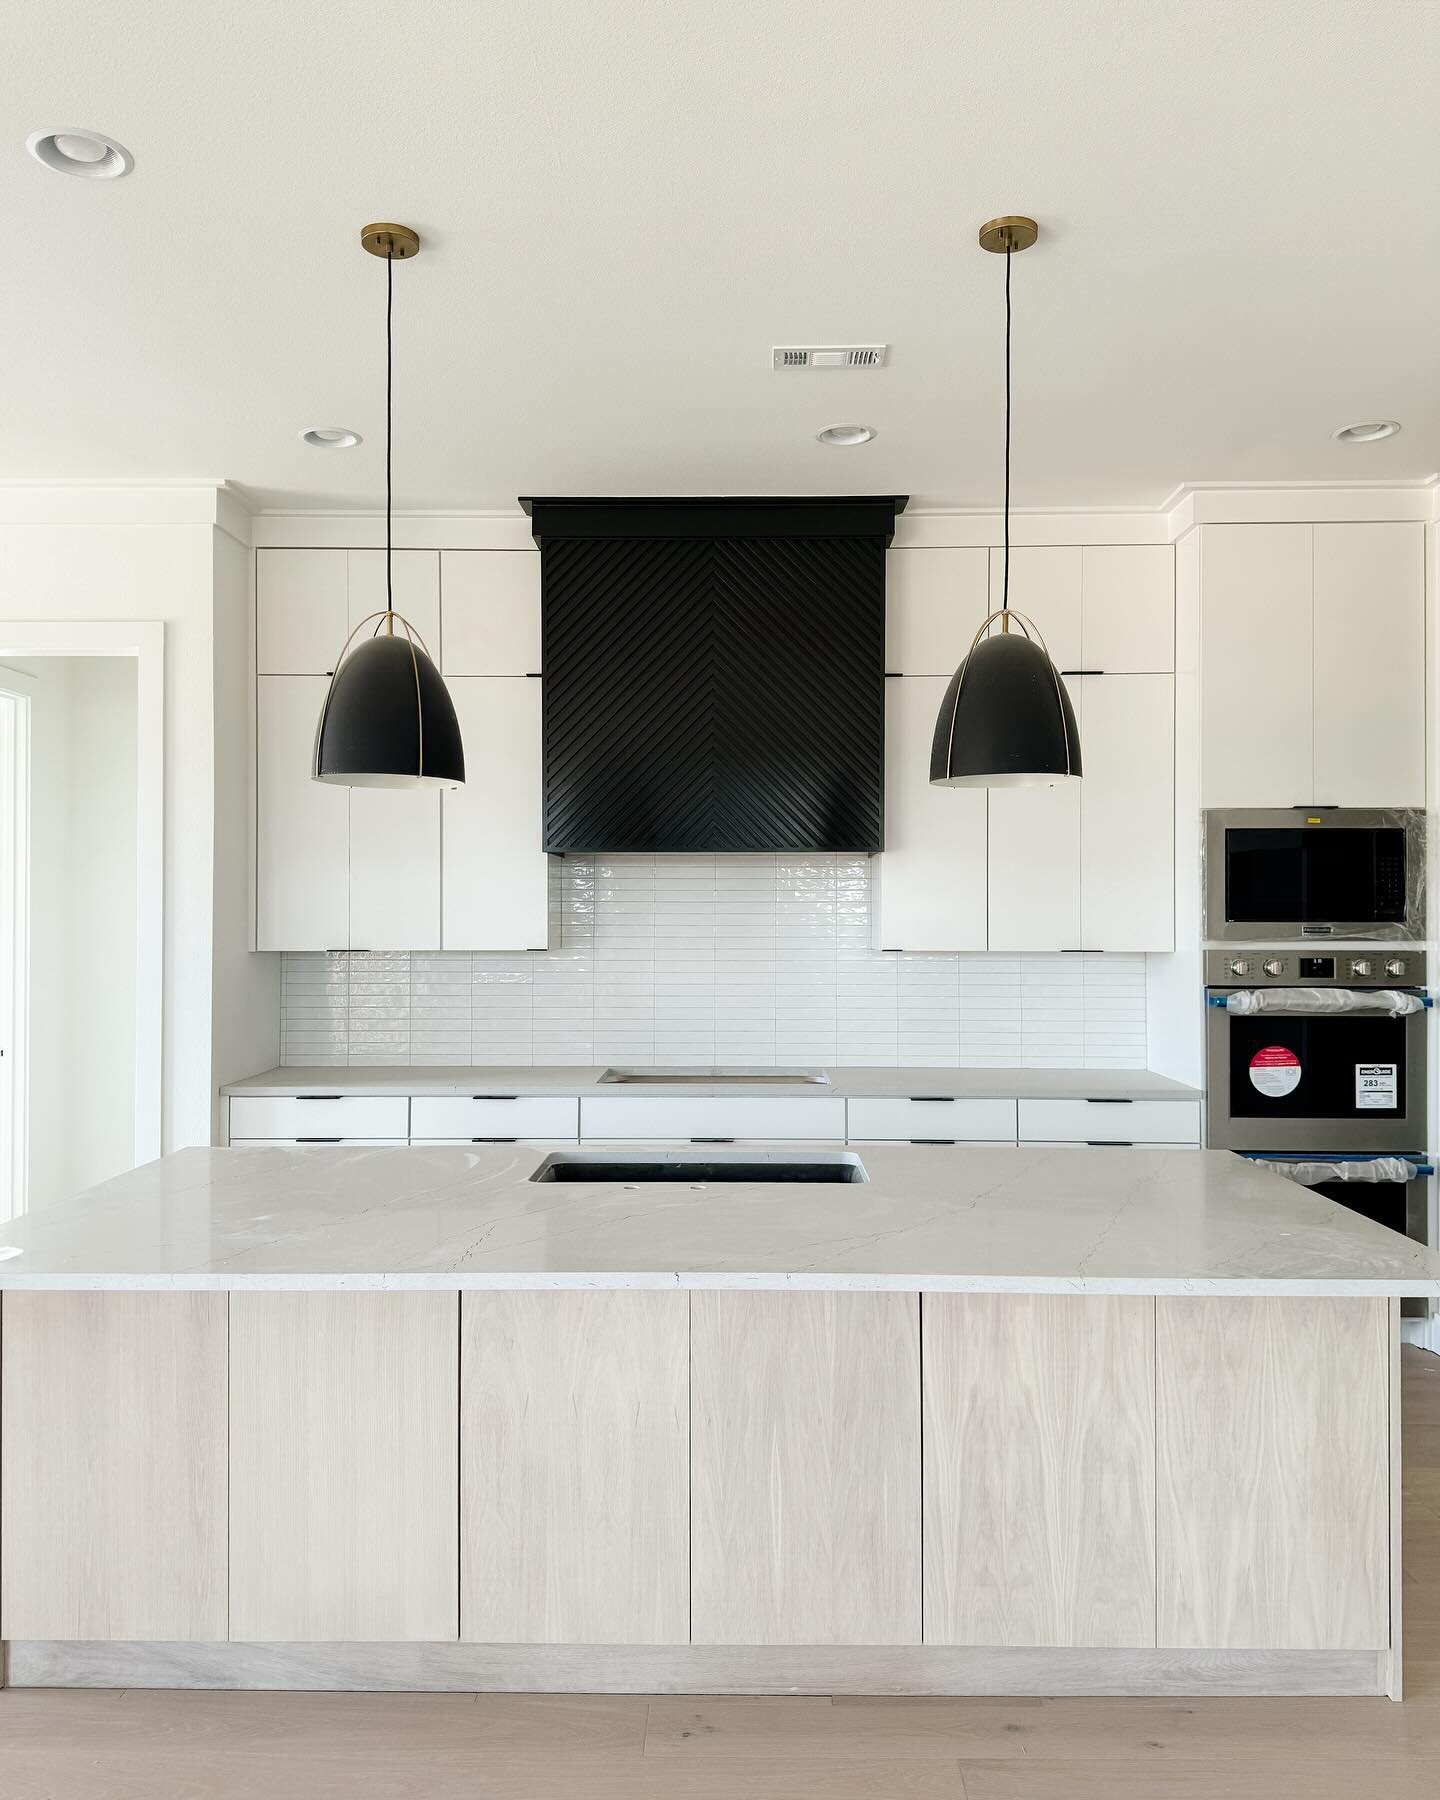 Can we take a moment to appreciate this custom hood on this kitchen? I mean WOW! These cabinets hit it out of the park! Thanks @lucasingui and @lornaingui for bringing this vision to life! Loving this collaboration 😍